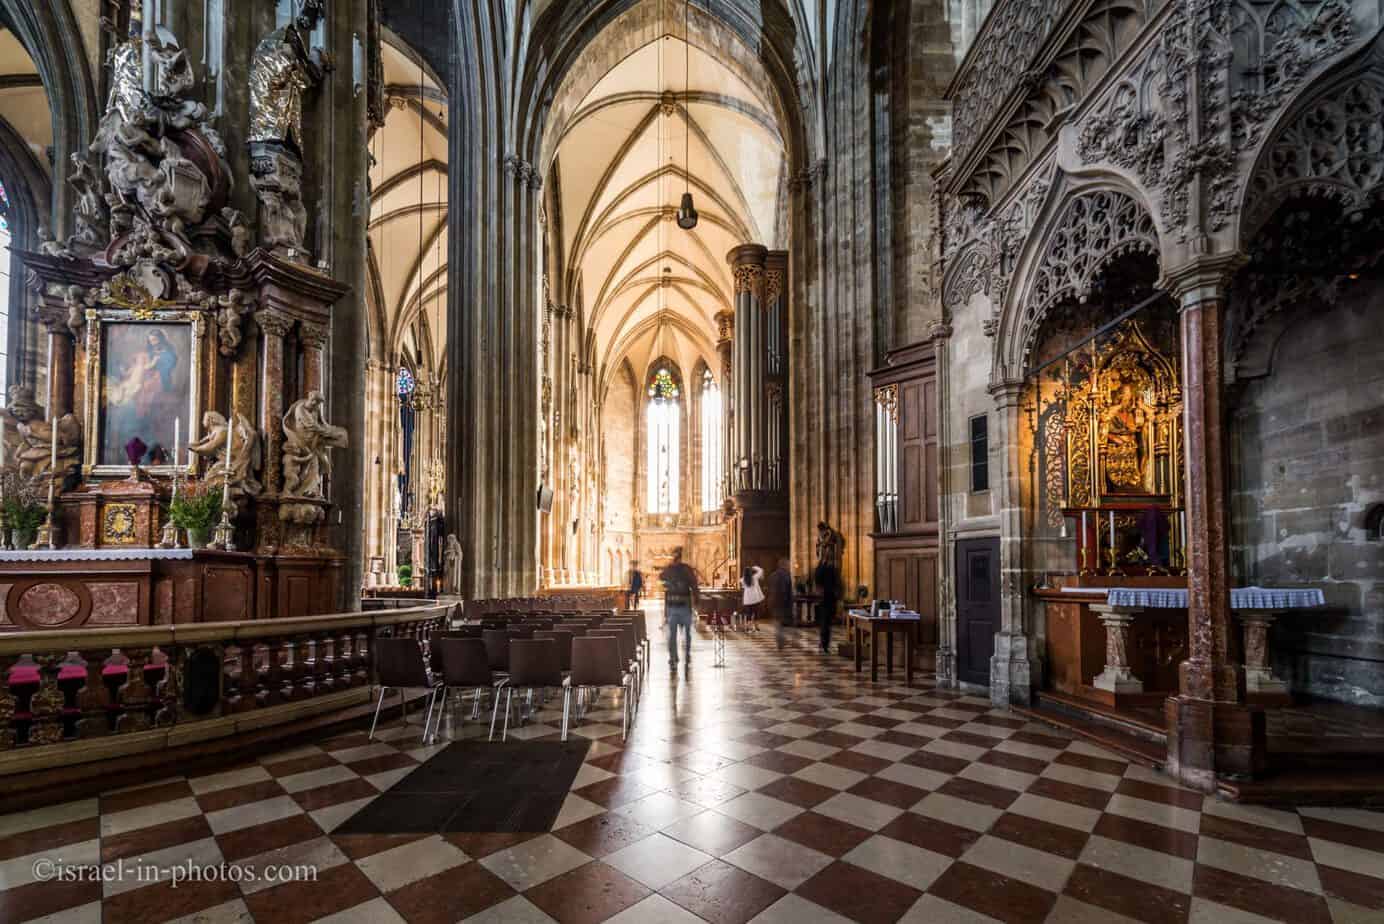 St. Stephen's Cathedral in Vienna, Austria’s capital